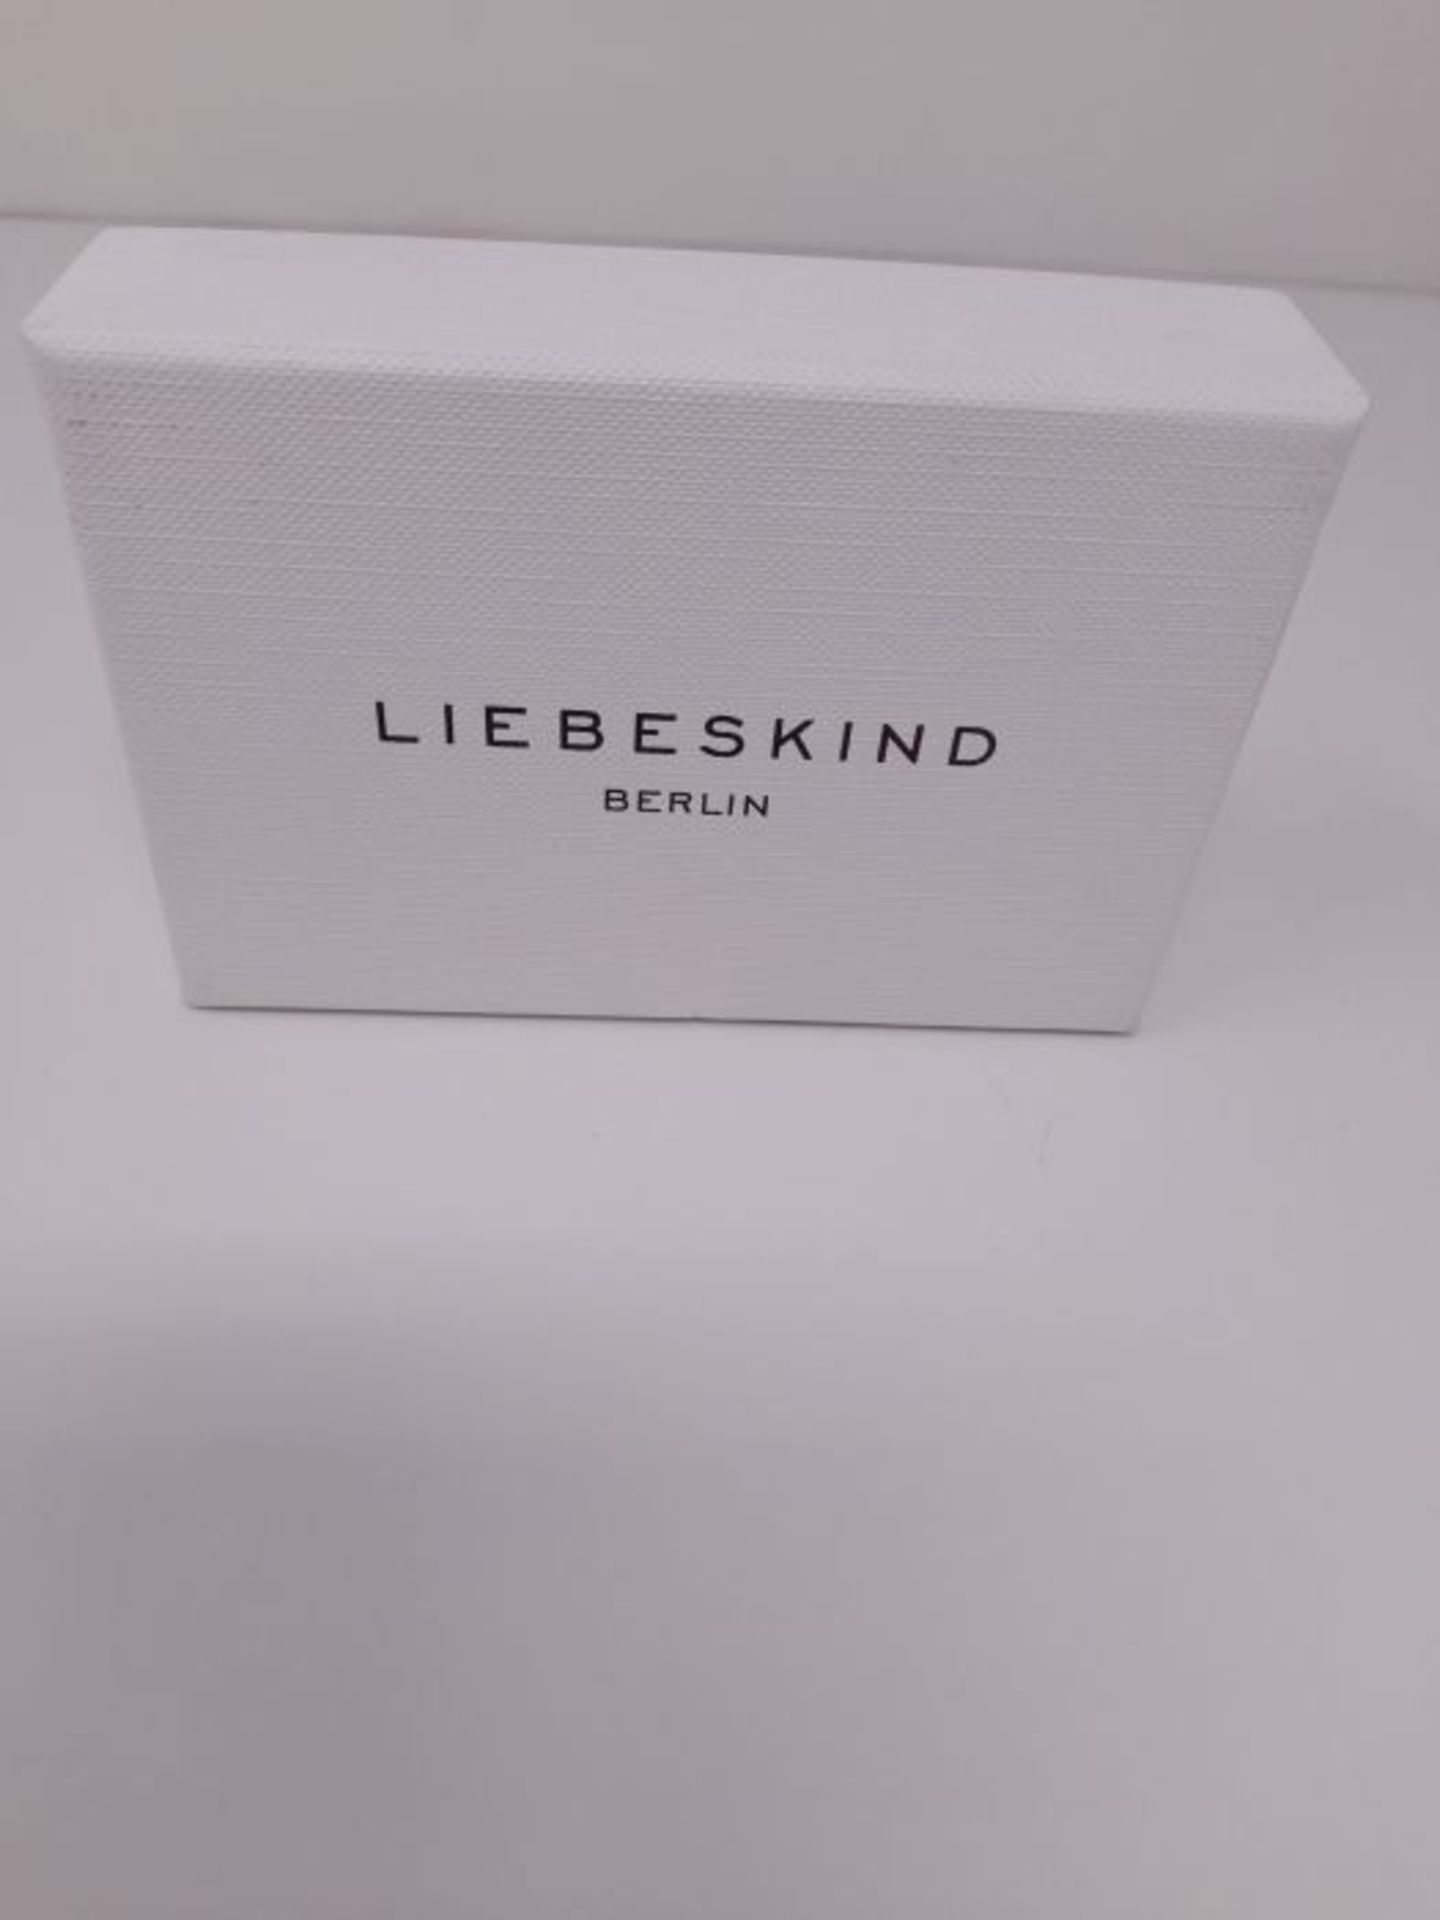 [CRACKED] Liebeskind Berlin Women Stainless Steel Anklet - LJ-0422-A-27 - Image 2 of 3